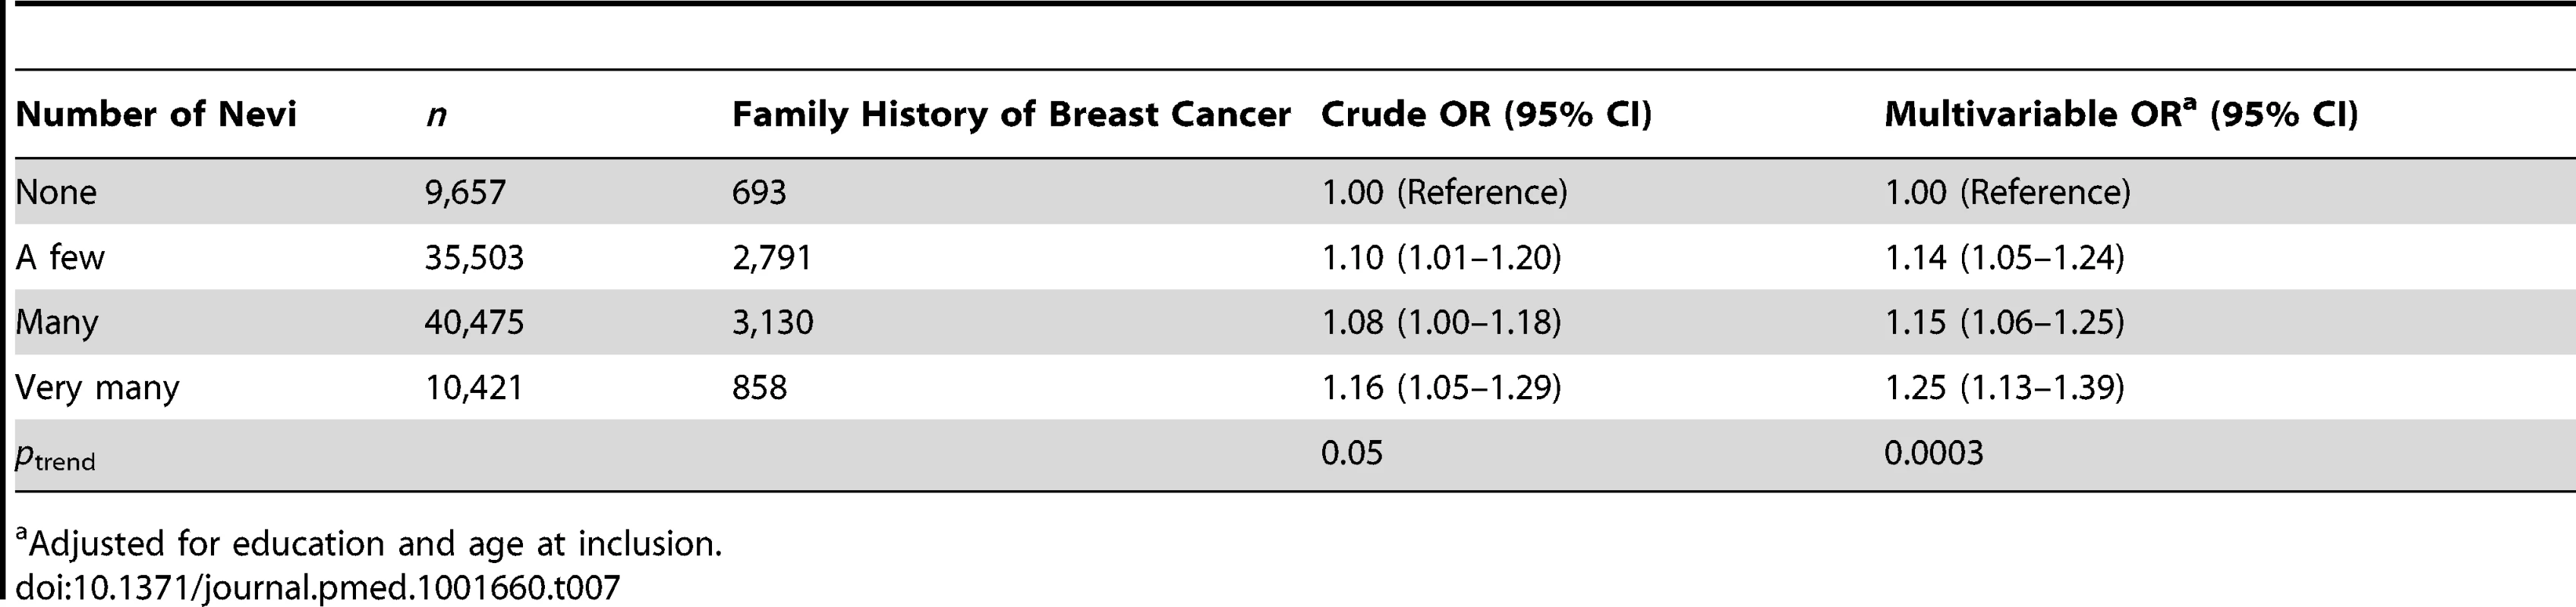 Odds ratios and 95% confidence intervals for number of nevi in relation to family history of breast cancer, E3N cohort.